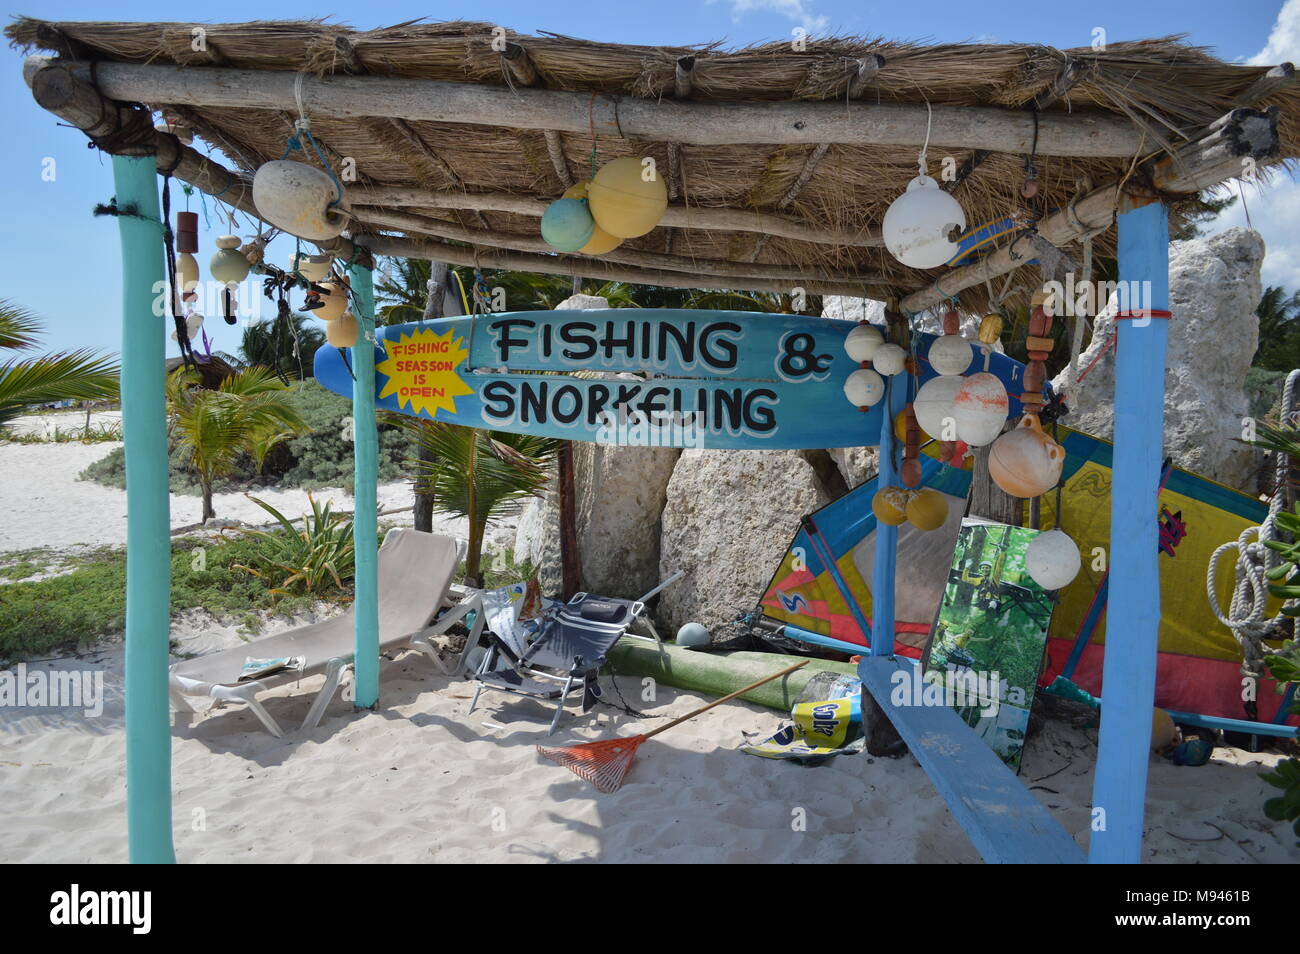 An advert for fishing and snorkeling at a Playa del Carmen beach, Mexico Stock Photo